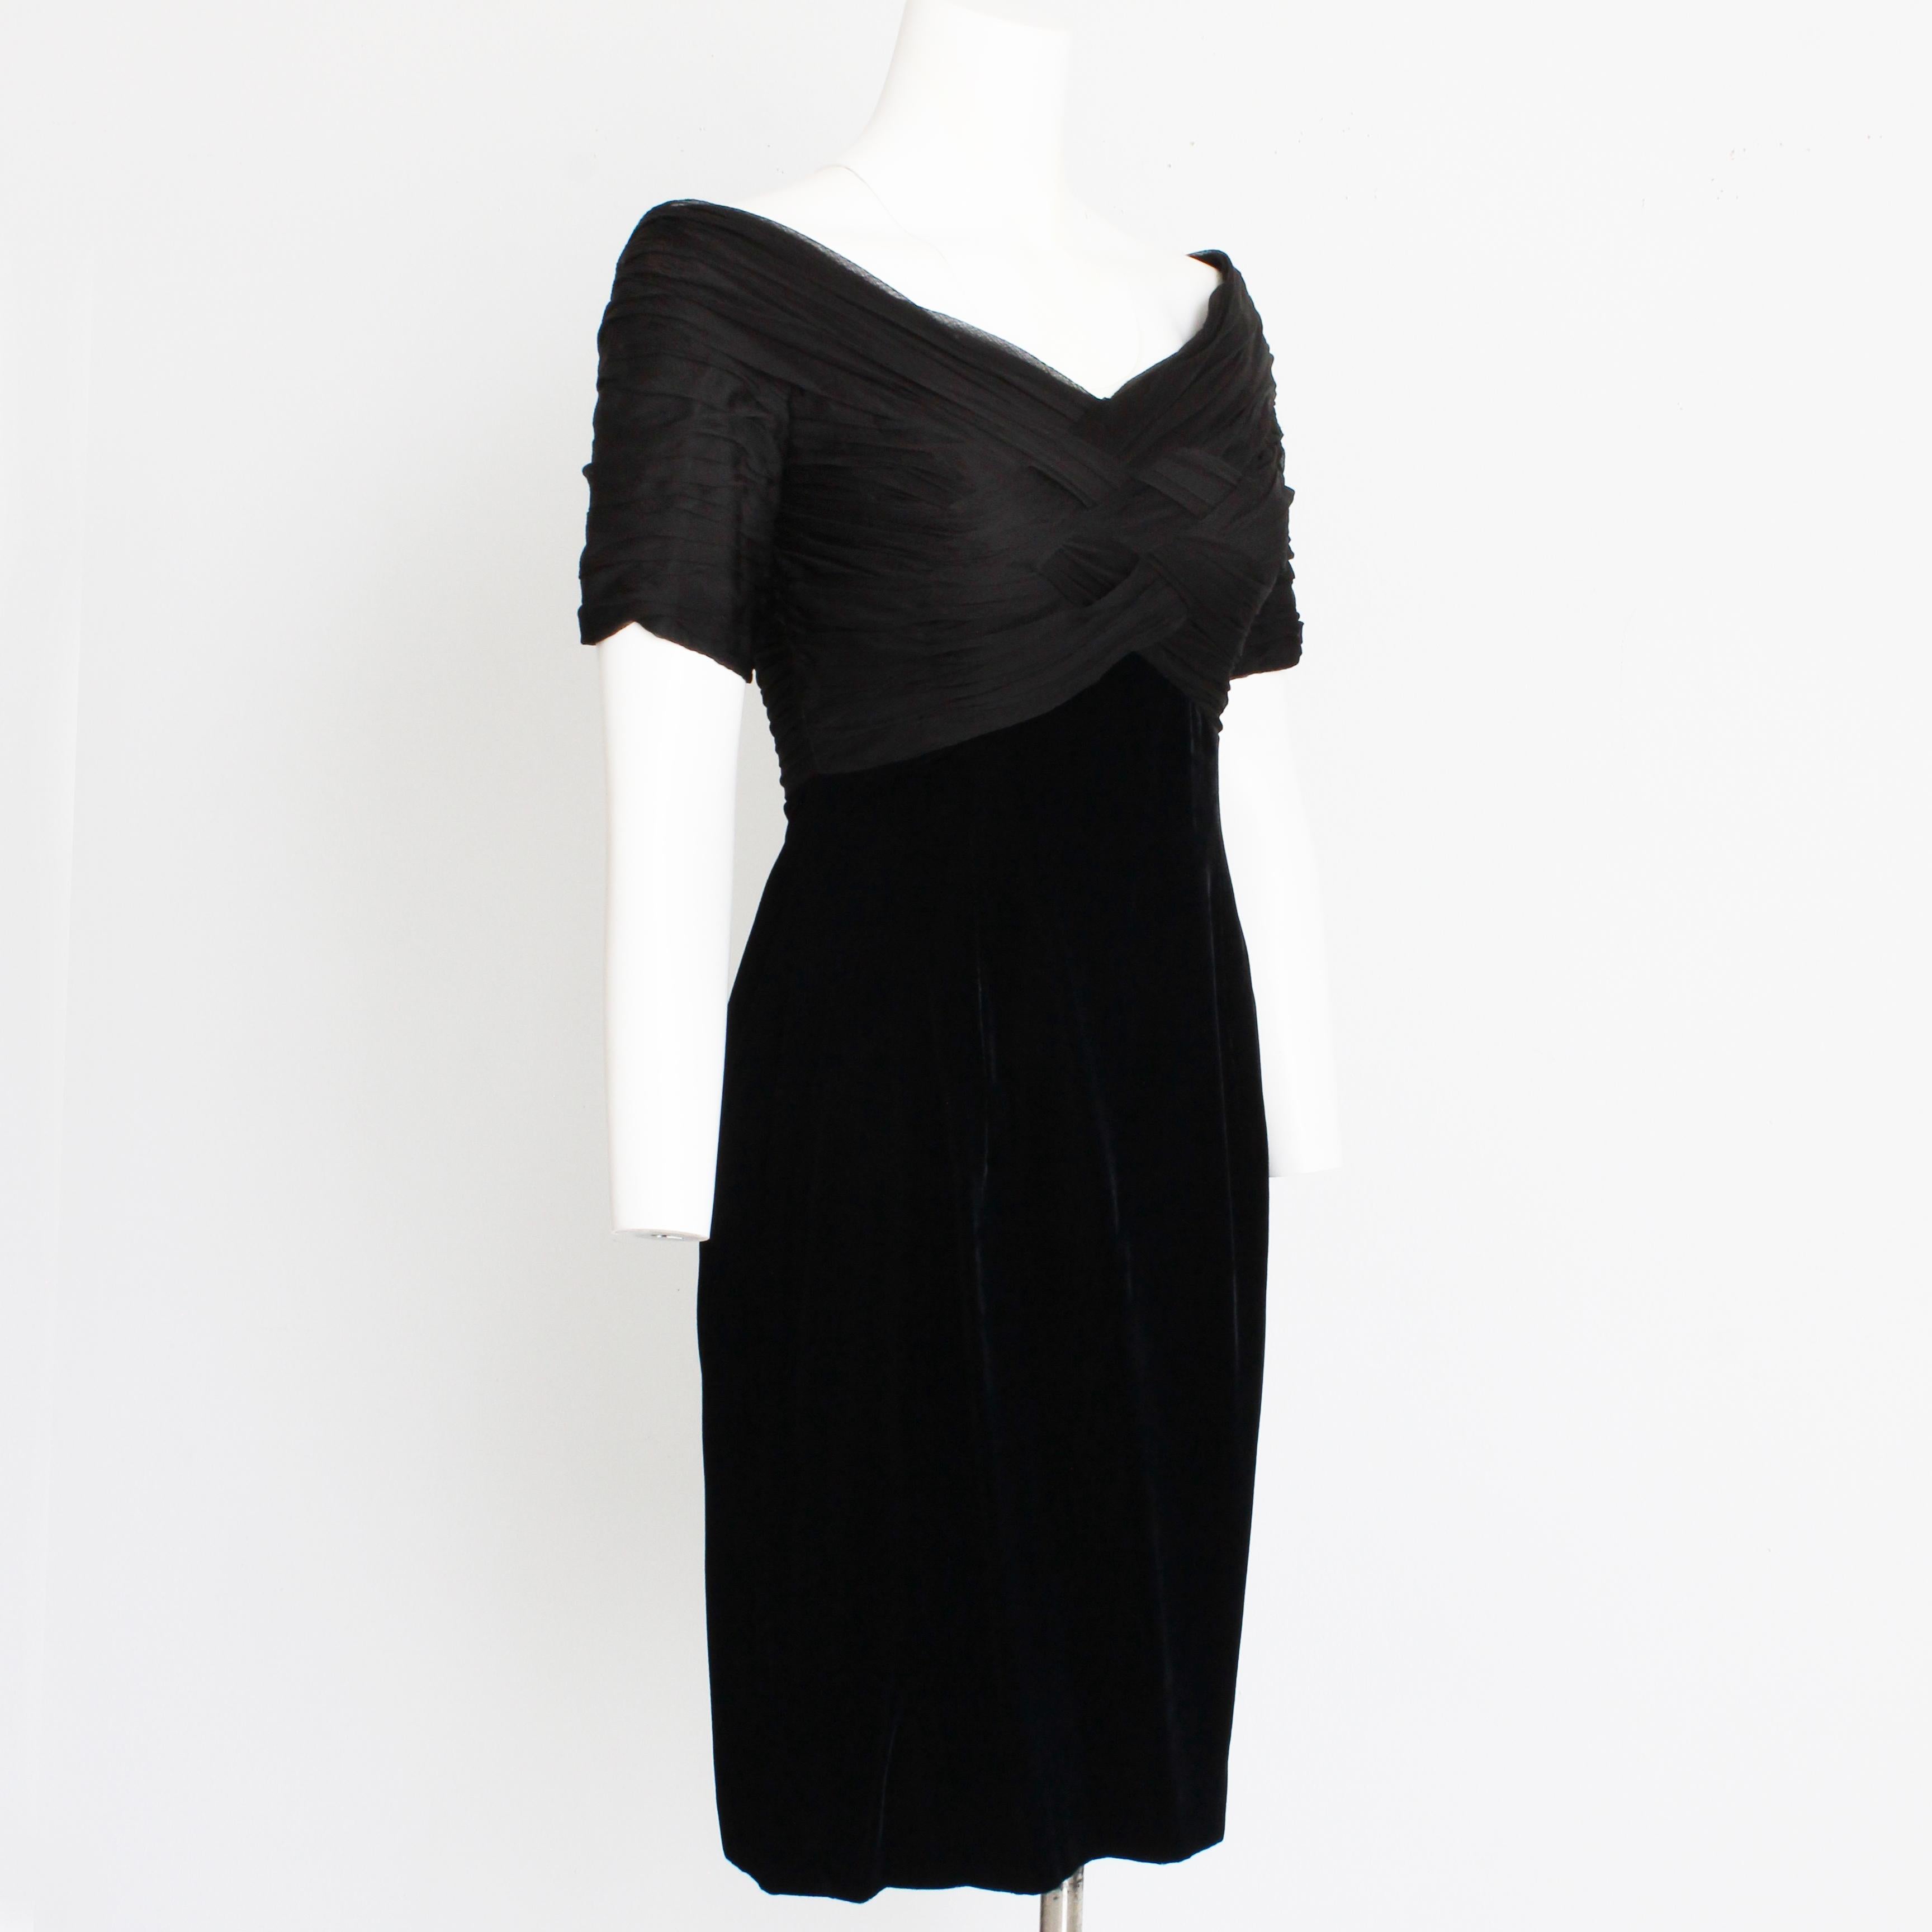 Authentic, preowned, vintage Bellville Sassoon Lorcan Mullany black woven silk bodice cocktail dress, likely made in the 90s.  Made from silk and rayon, it features a gorgeous woven bodice, an empire waist and black velvet skirt.  

An incredibly